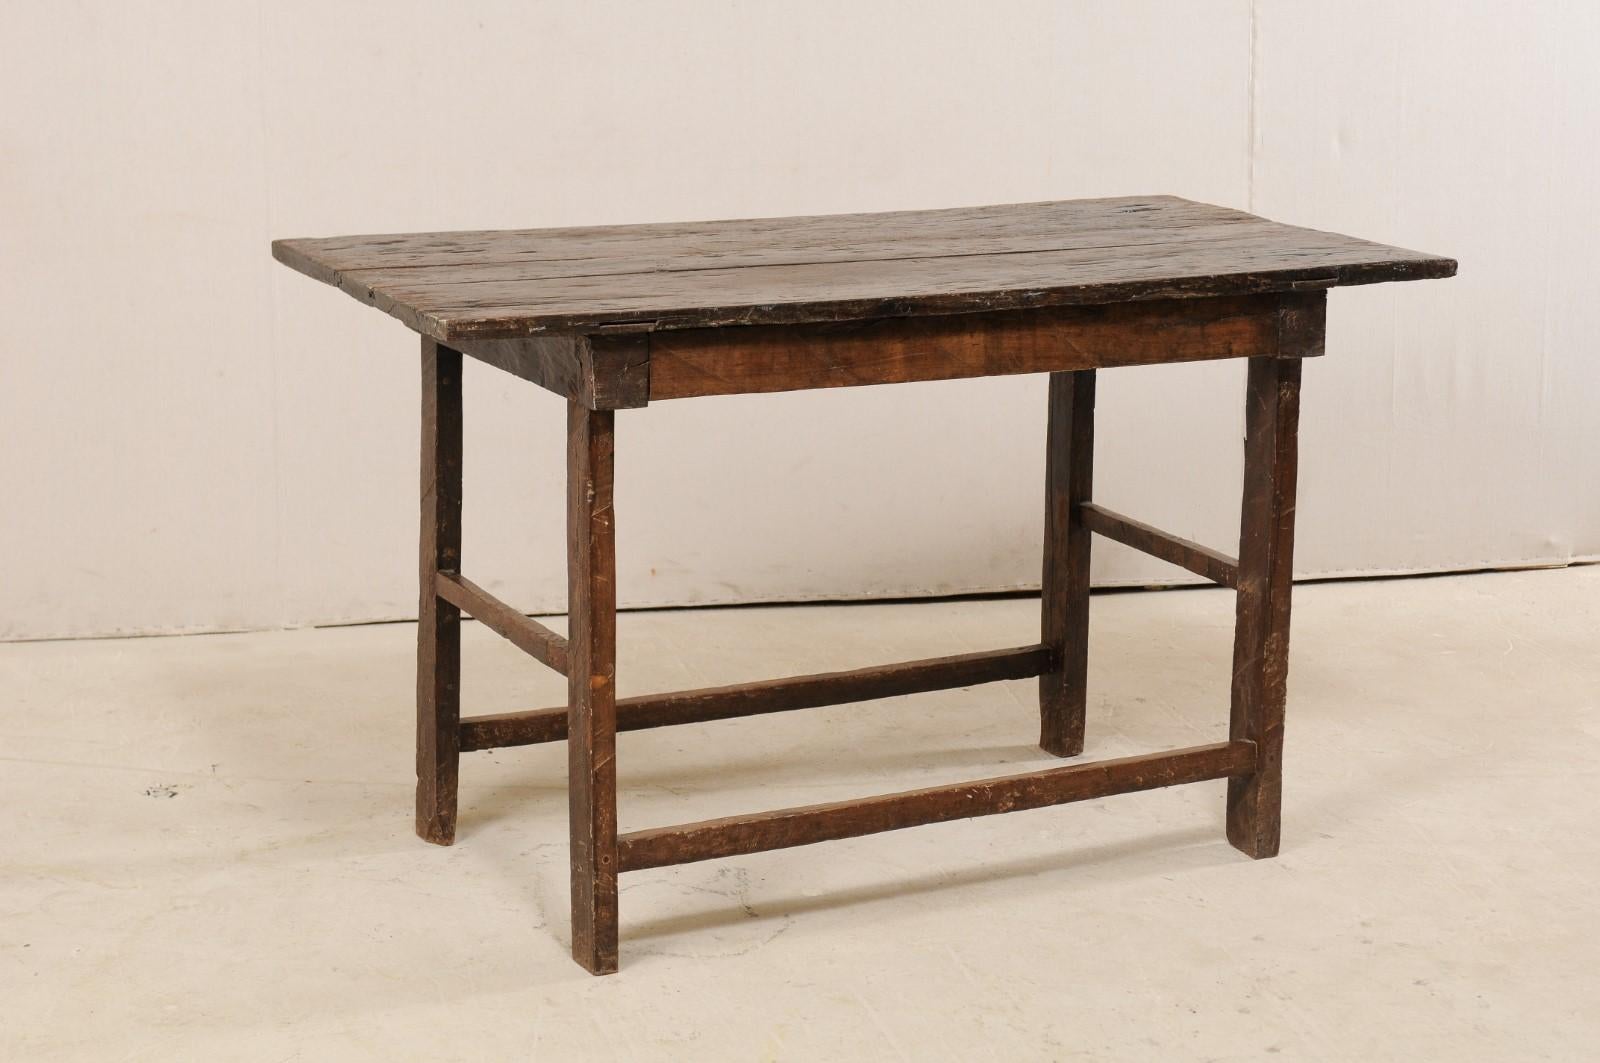 An 18th century table of peroba wood from Brazil. This antique Brazilian occasional table has a simple, bucolic design with a rectangular plank board top which overhangs the simple apron on which it rests. The table, which is nearly counter height